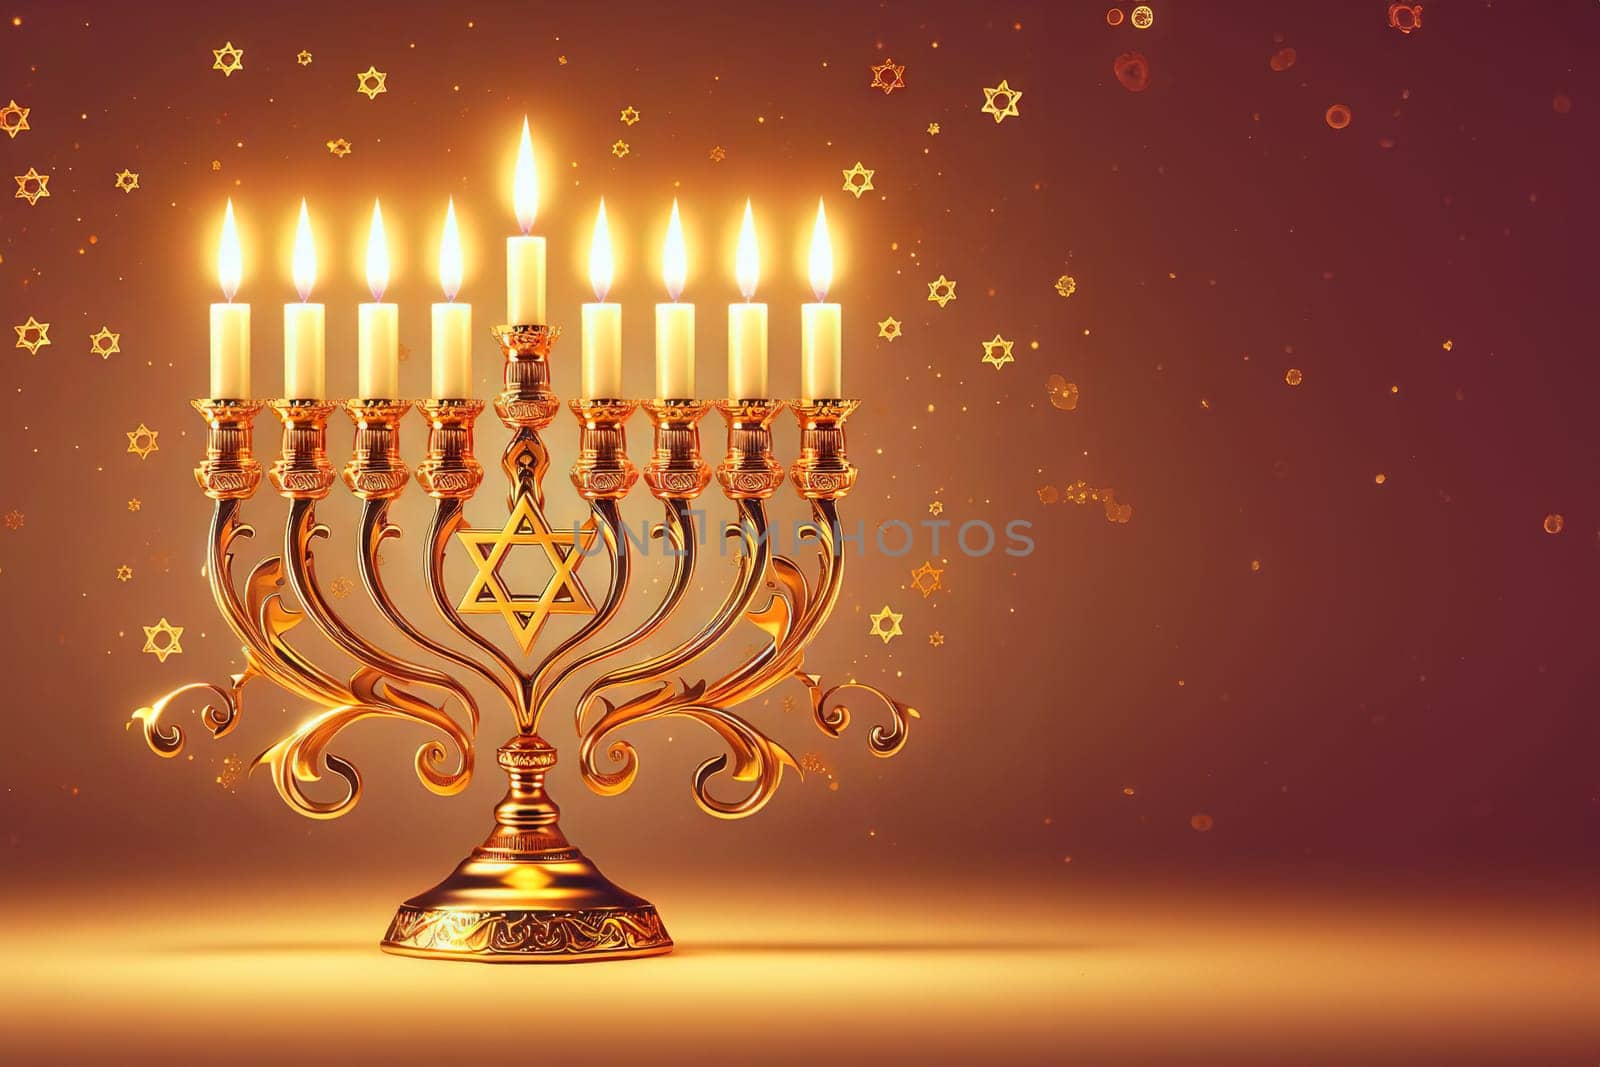 Concept banner for Jewish holiday Hanukkah, space for text on background with bokeh